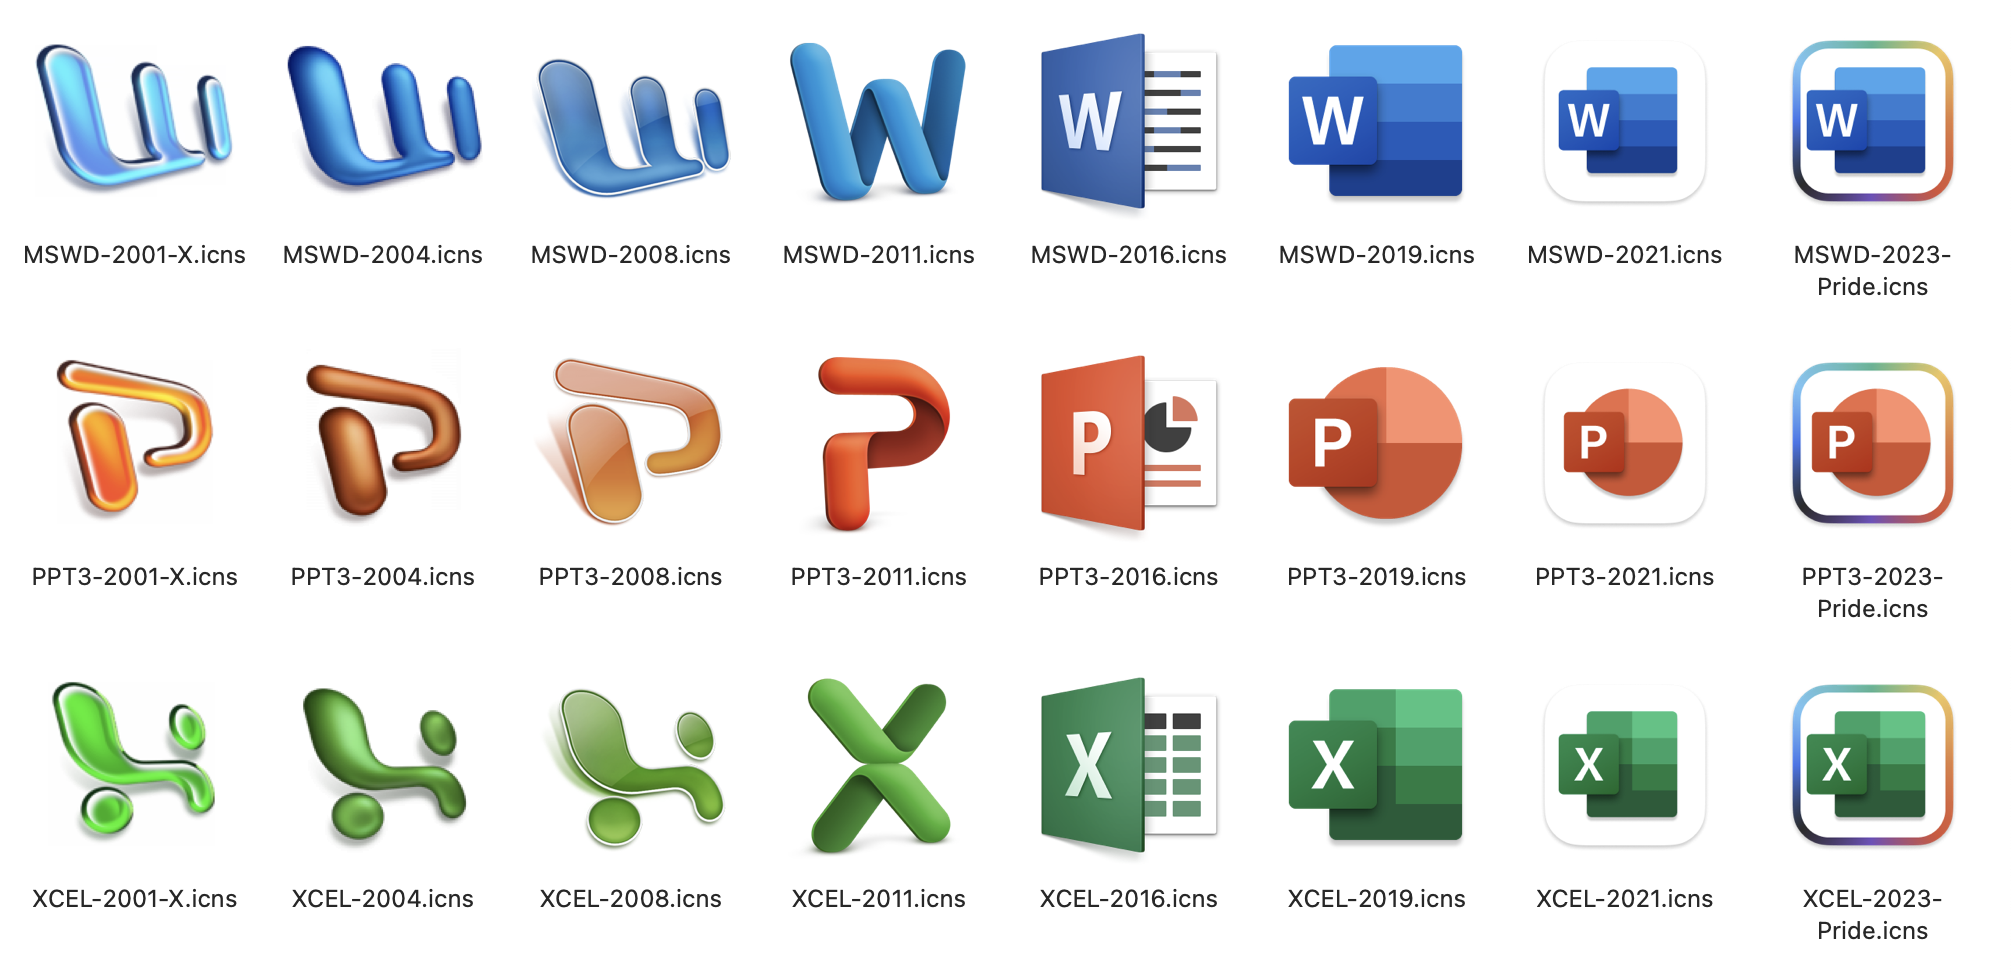 Office for OS X icons (2022 Pride update)